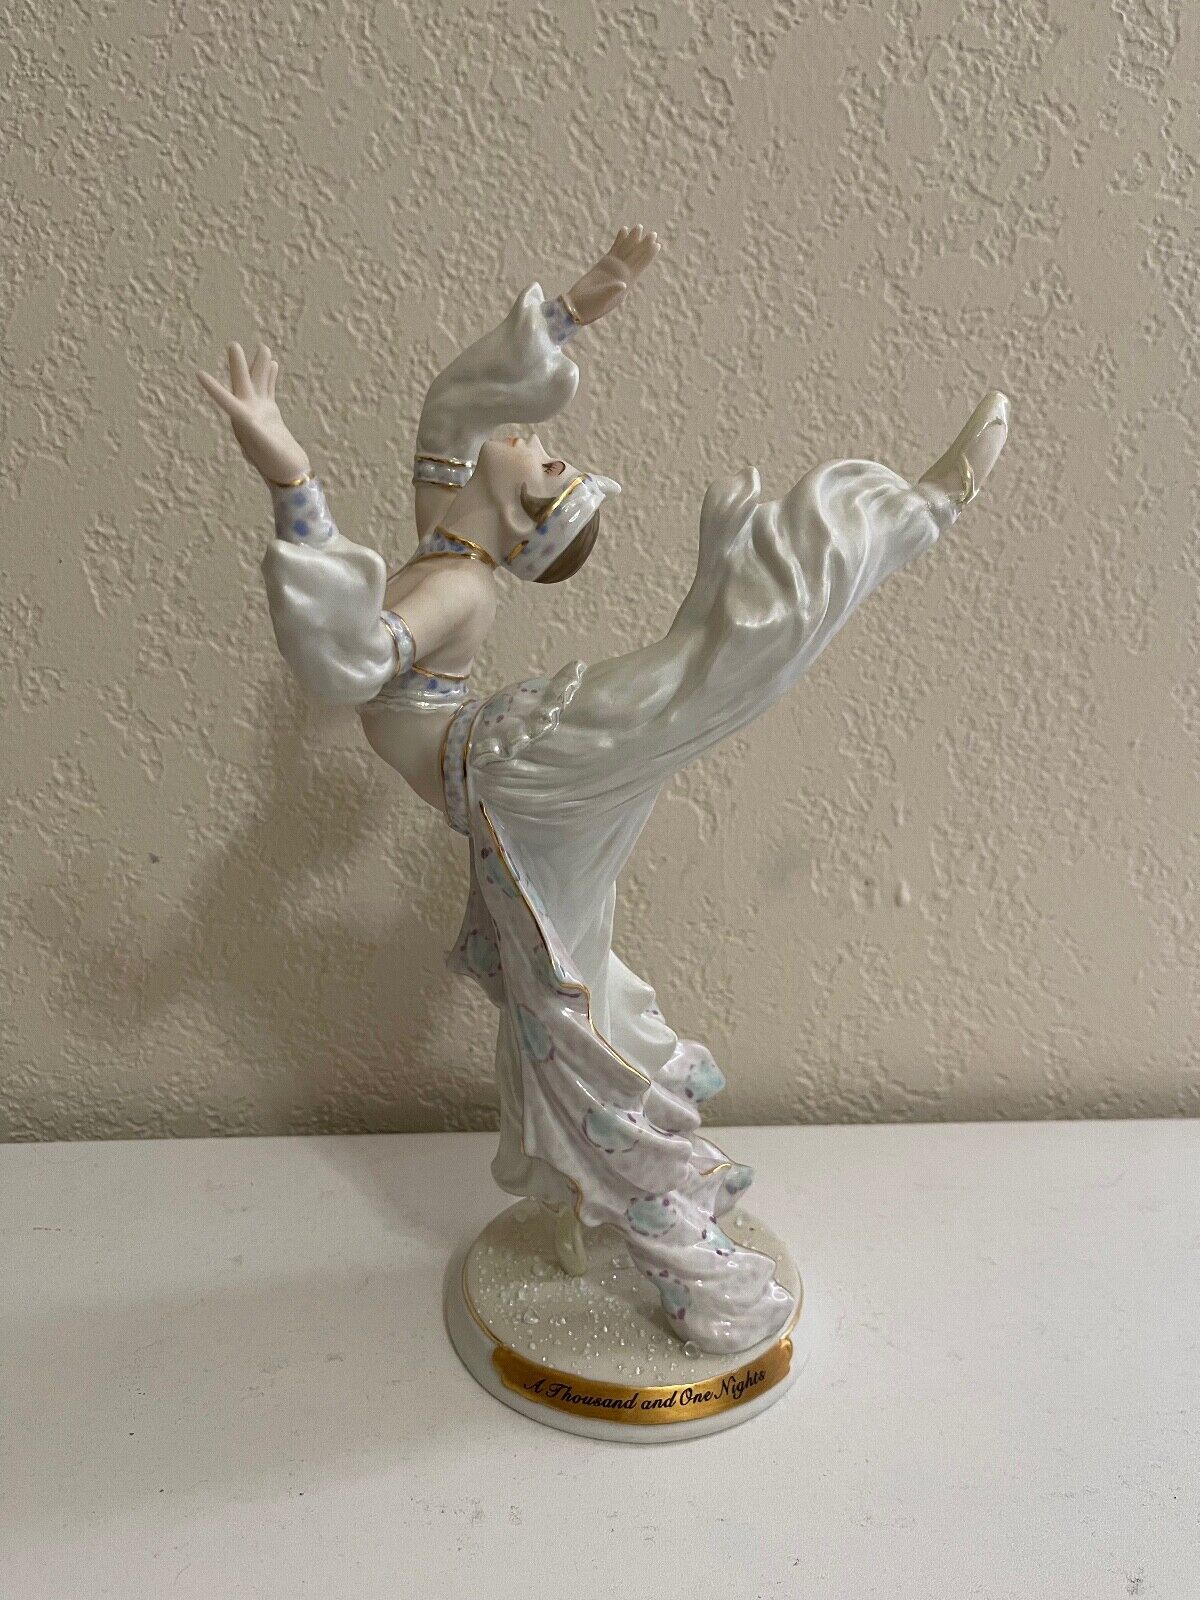 1996 Enesco by Pearl Prima A Thousand and One Nights Ballet Porcelain Figurine